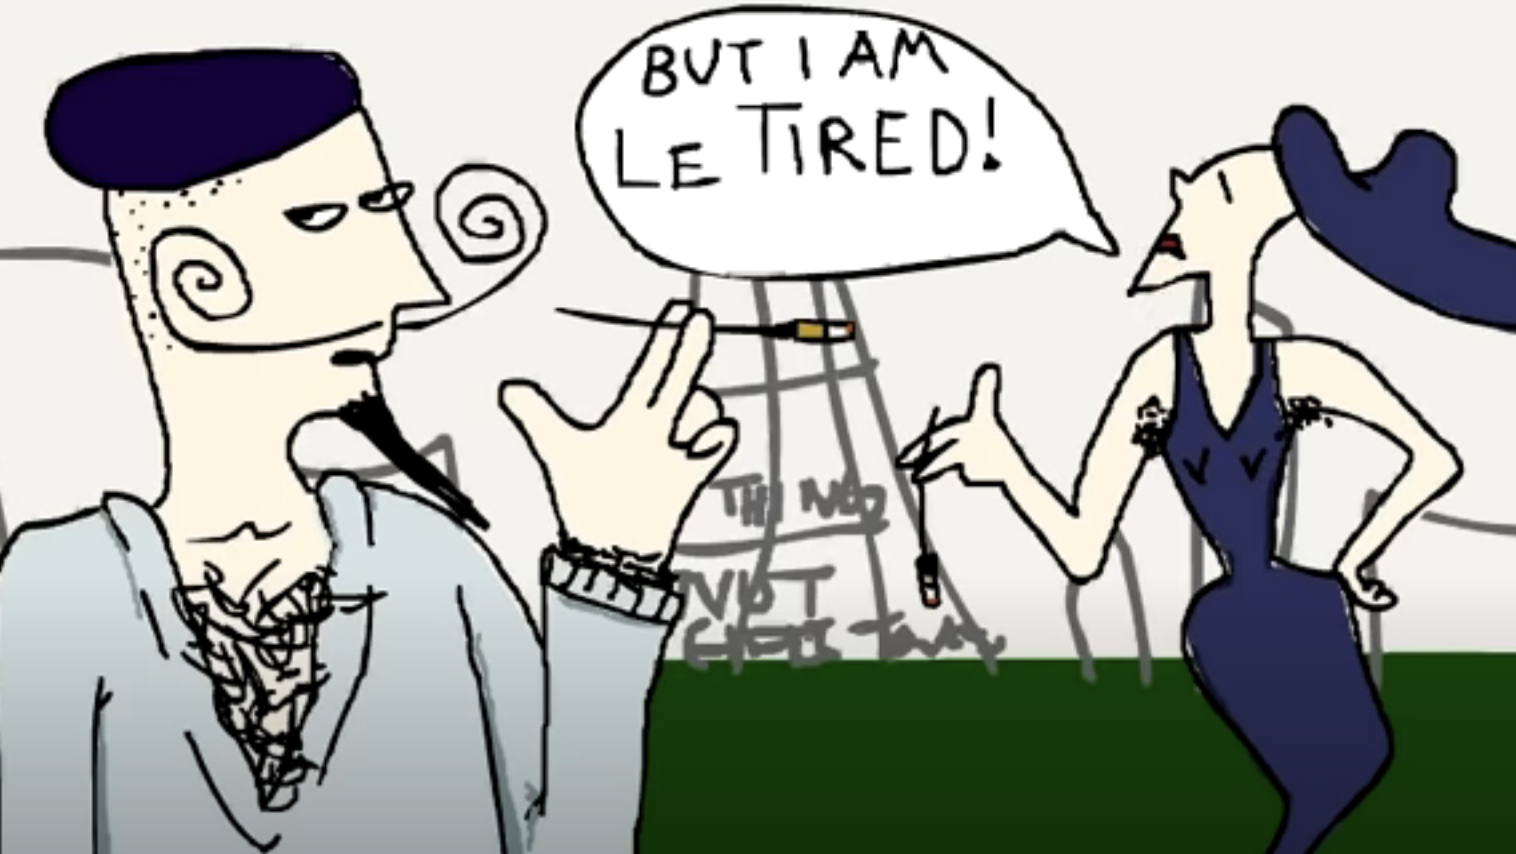 A still from the &quot;End of the World&quot; Flash cartoon with the French characters saying &quot;but I am le tired&quot;